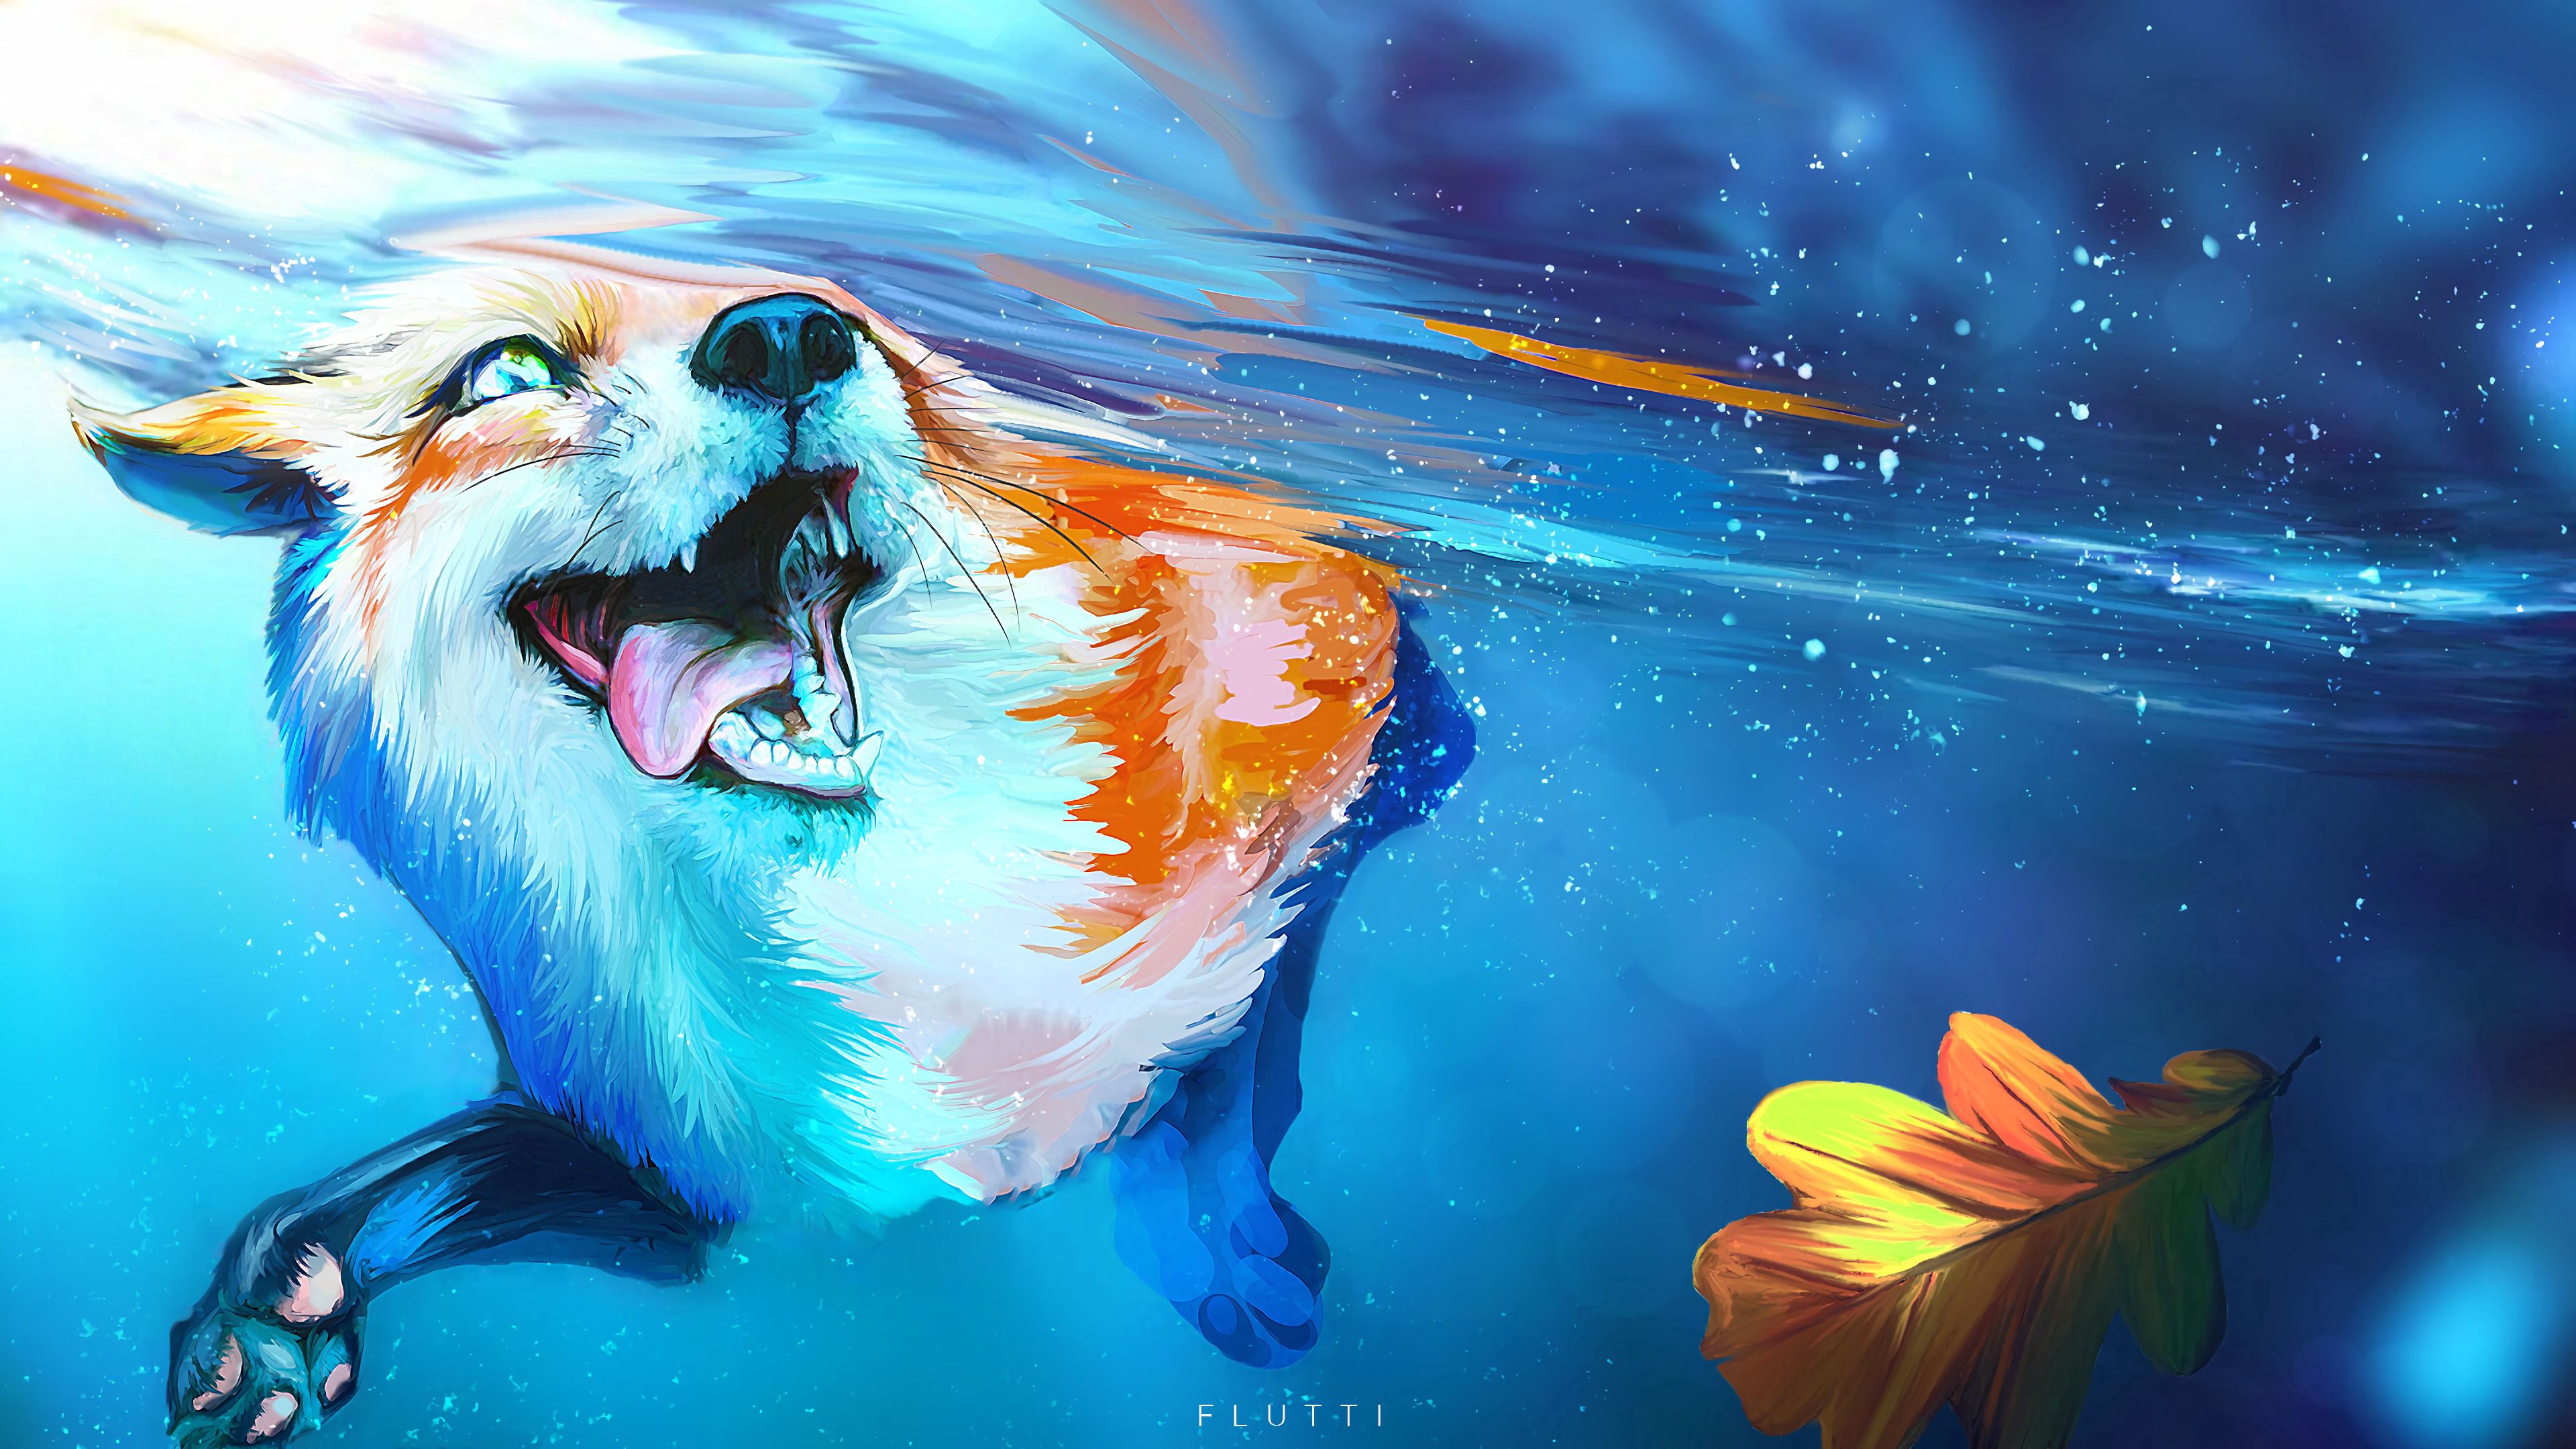 under water, water, art, fox, protruding tongue, tongue stuck out, to swim, swim, underwater